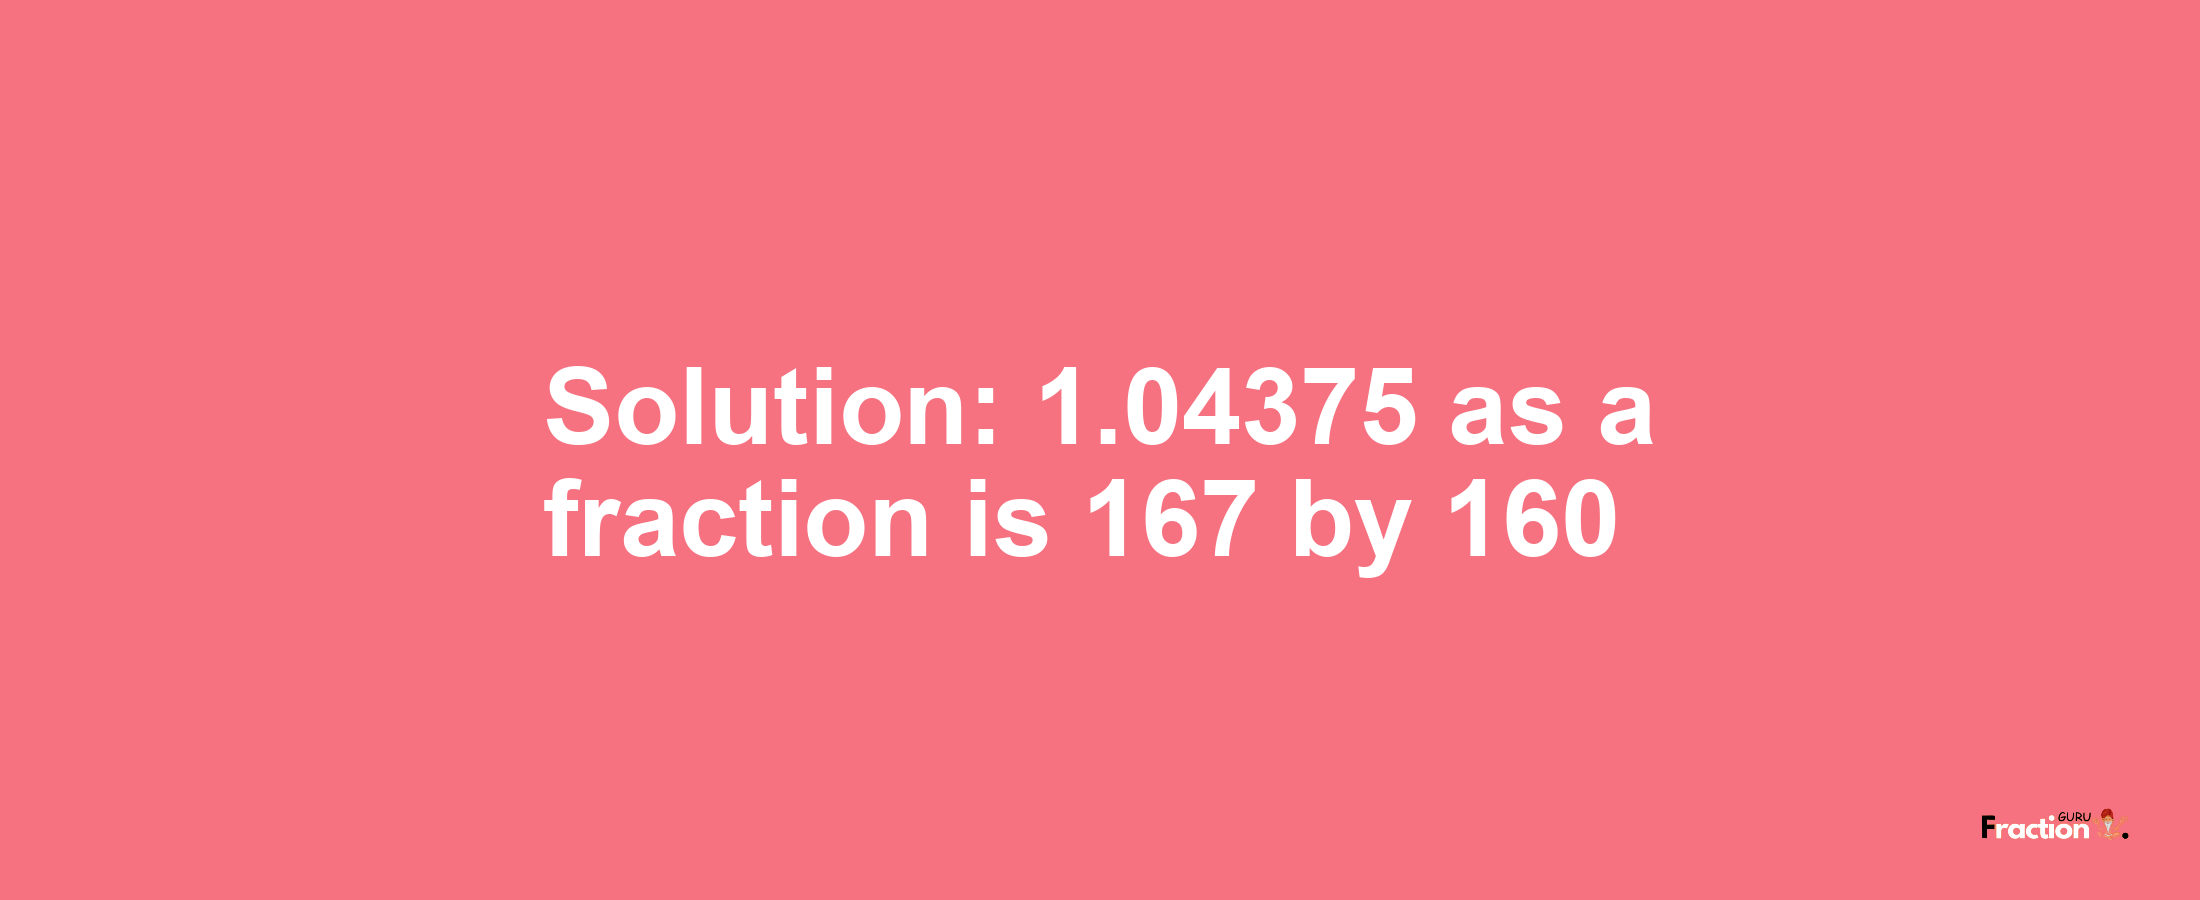 Solution:1.04375 as a fraction is 167/160